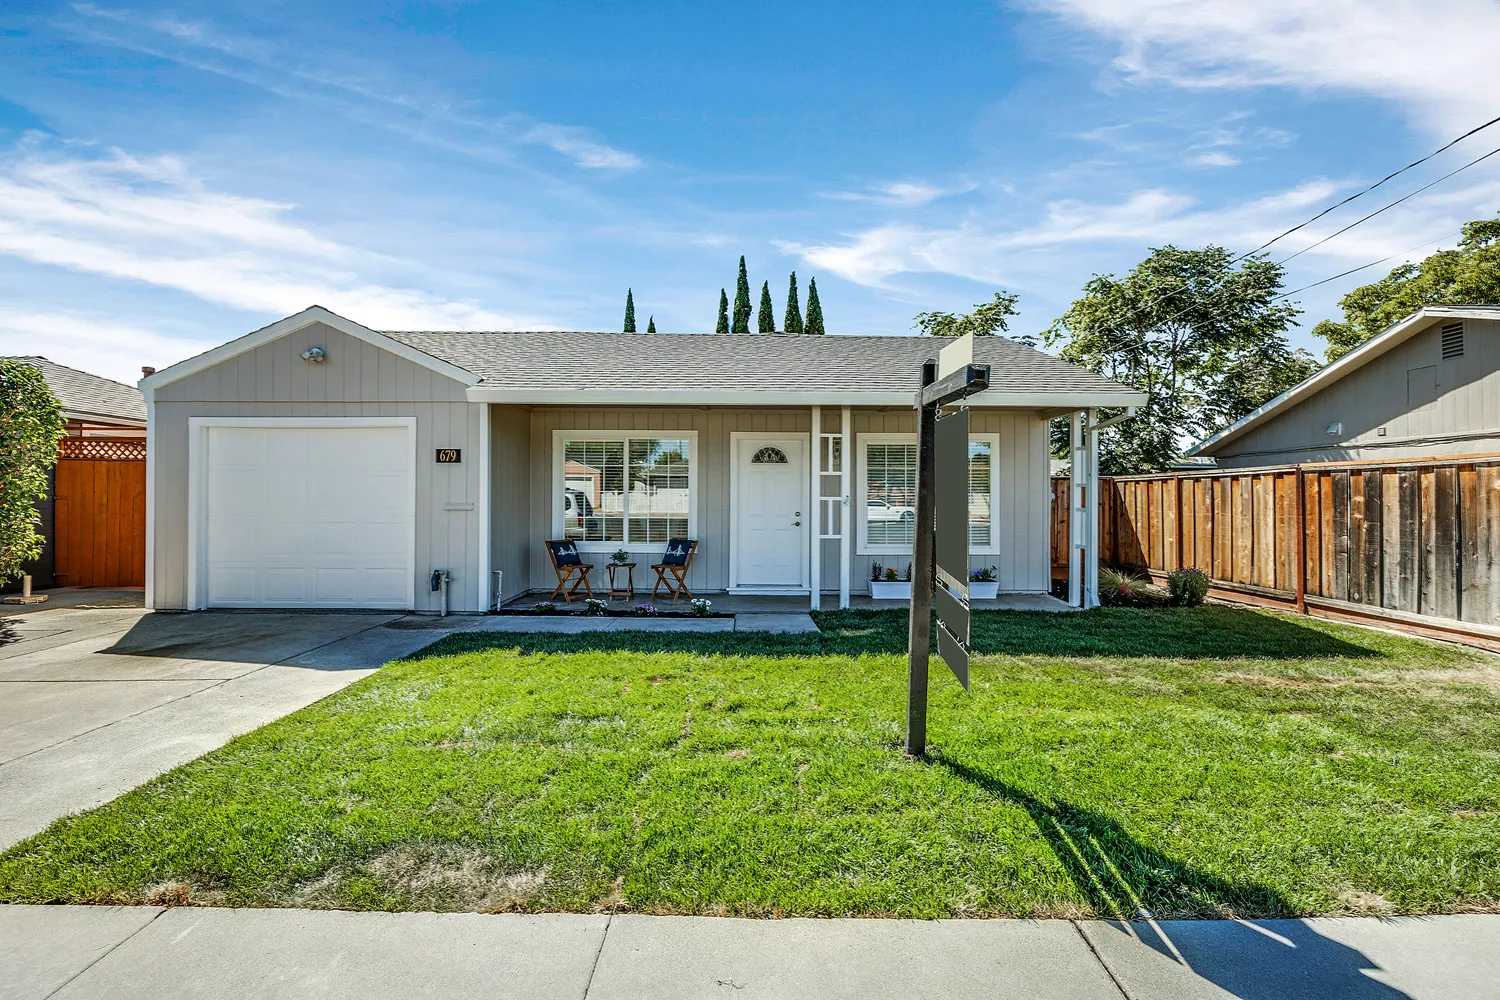 Residential in Livermore, 679 James Street 10810389